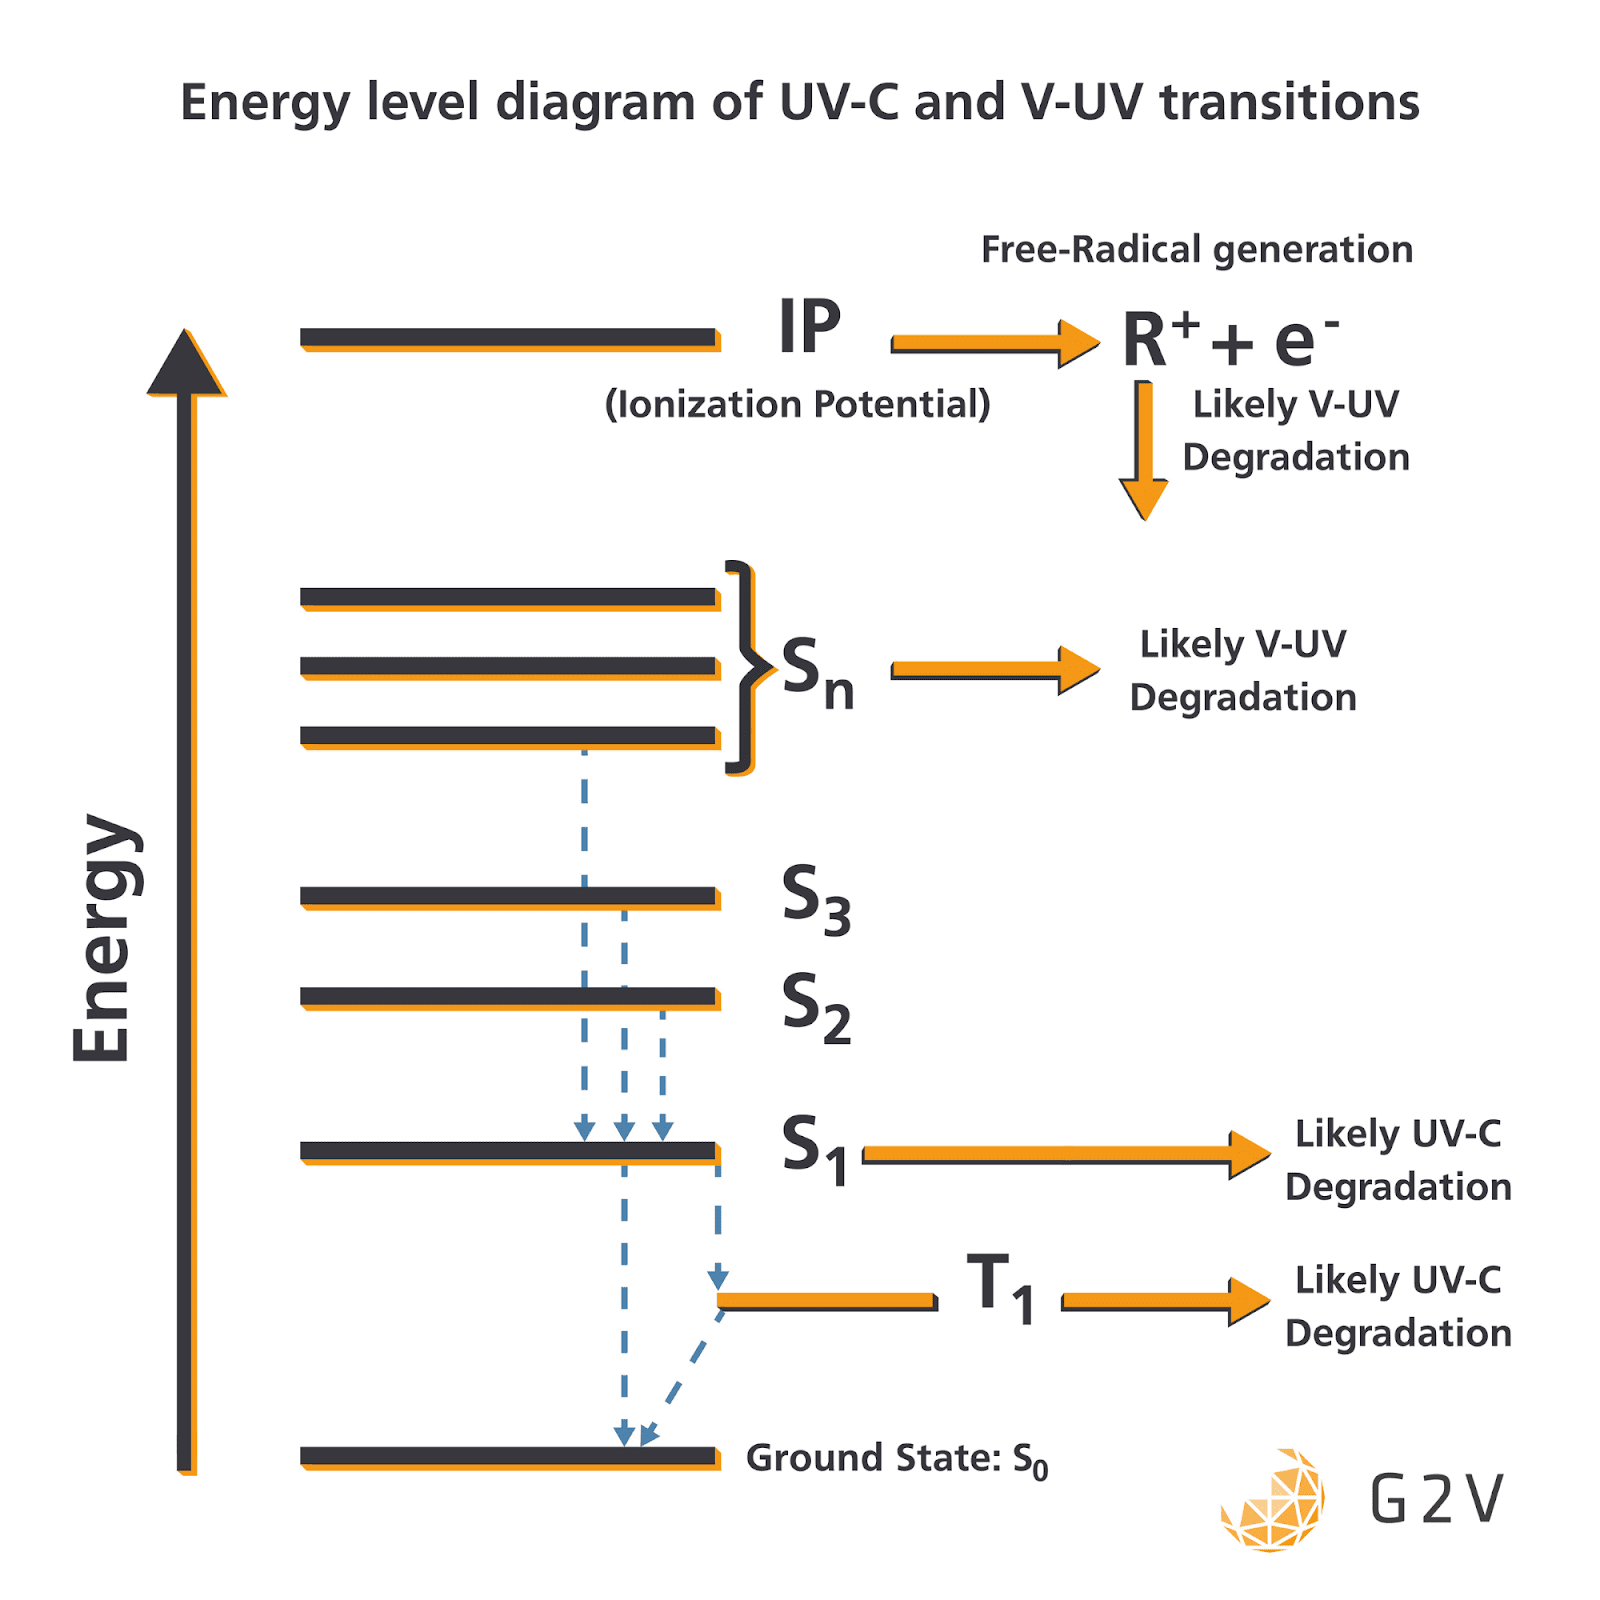 Energy level diagram showing general physical and chemical transitions and degradation pathways experienced by UV-C and V-UV absorption